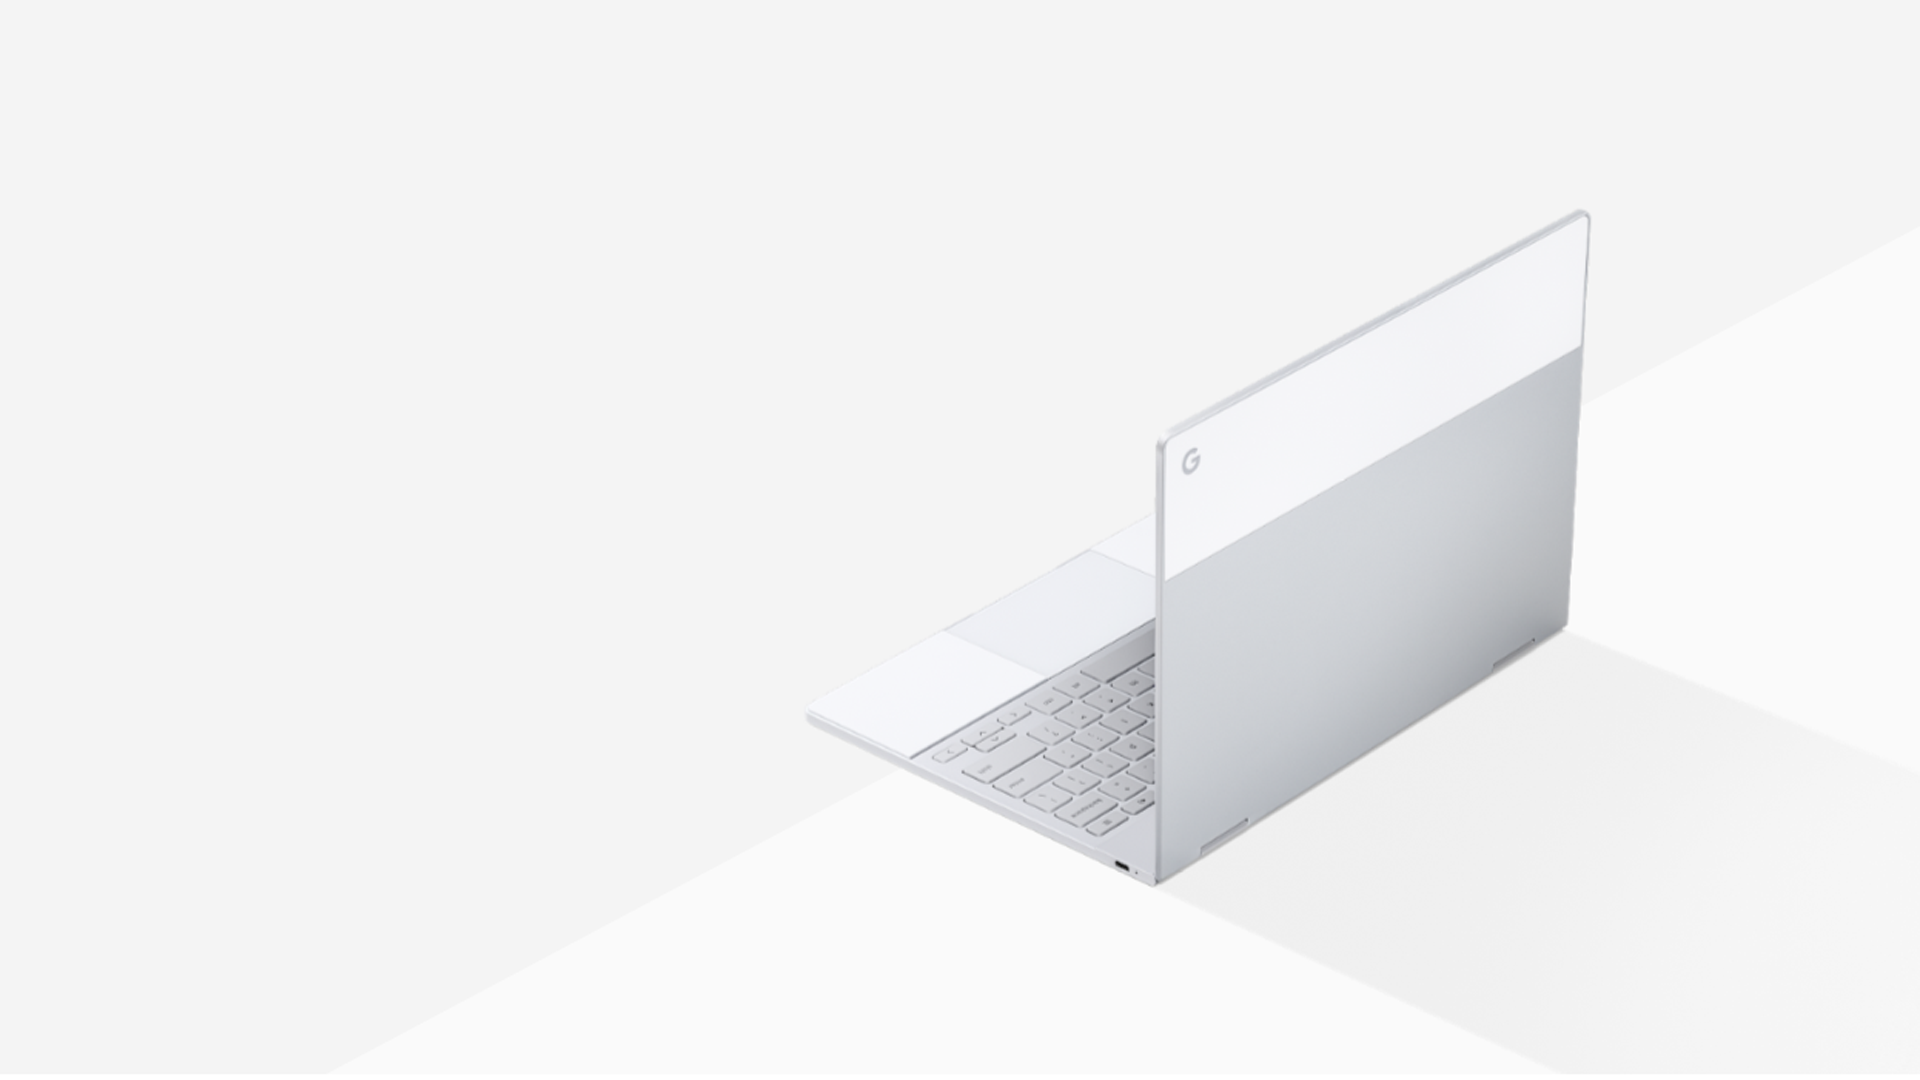 A photo of the Google Pixelbook.